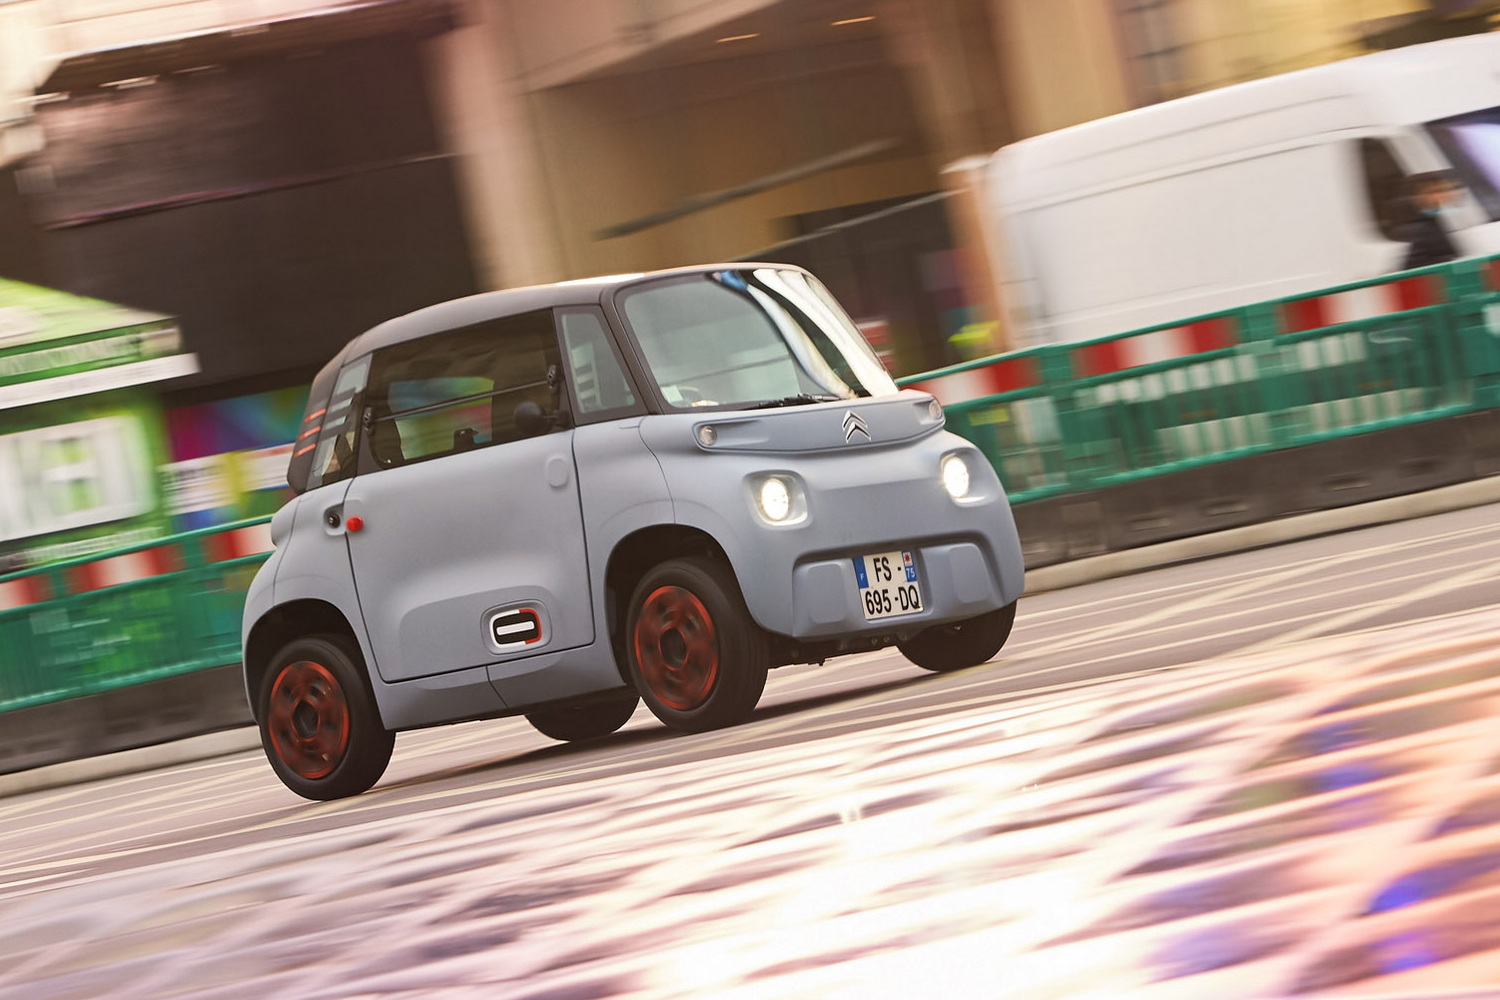 Citroën Ami review: Is it a car? Is it a moped? No, it's a